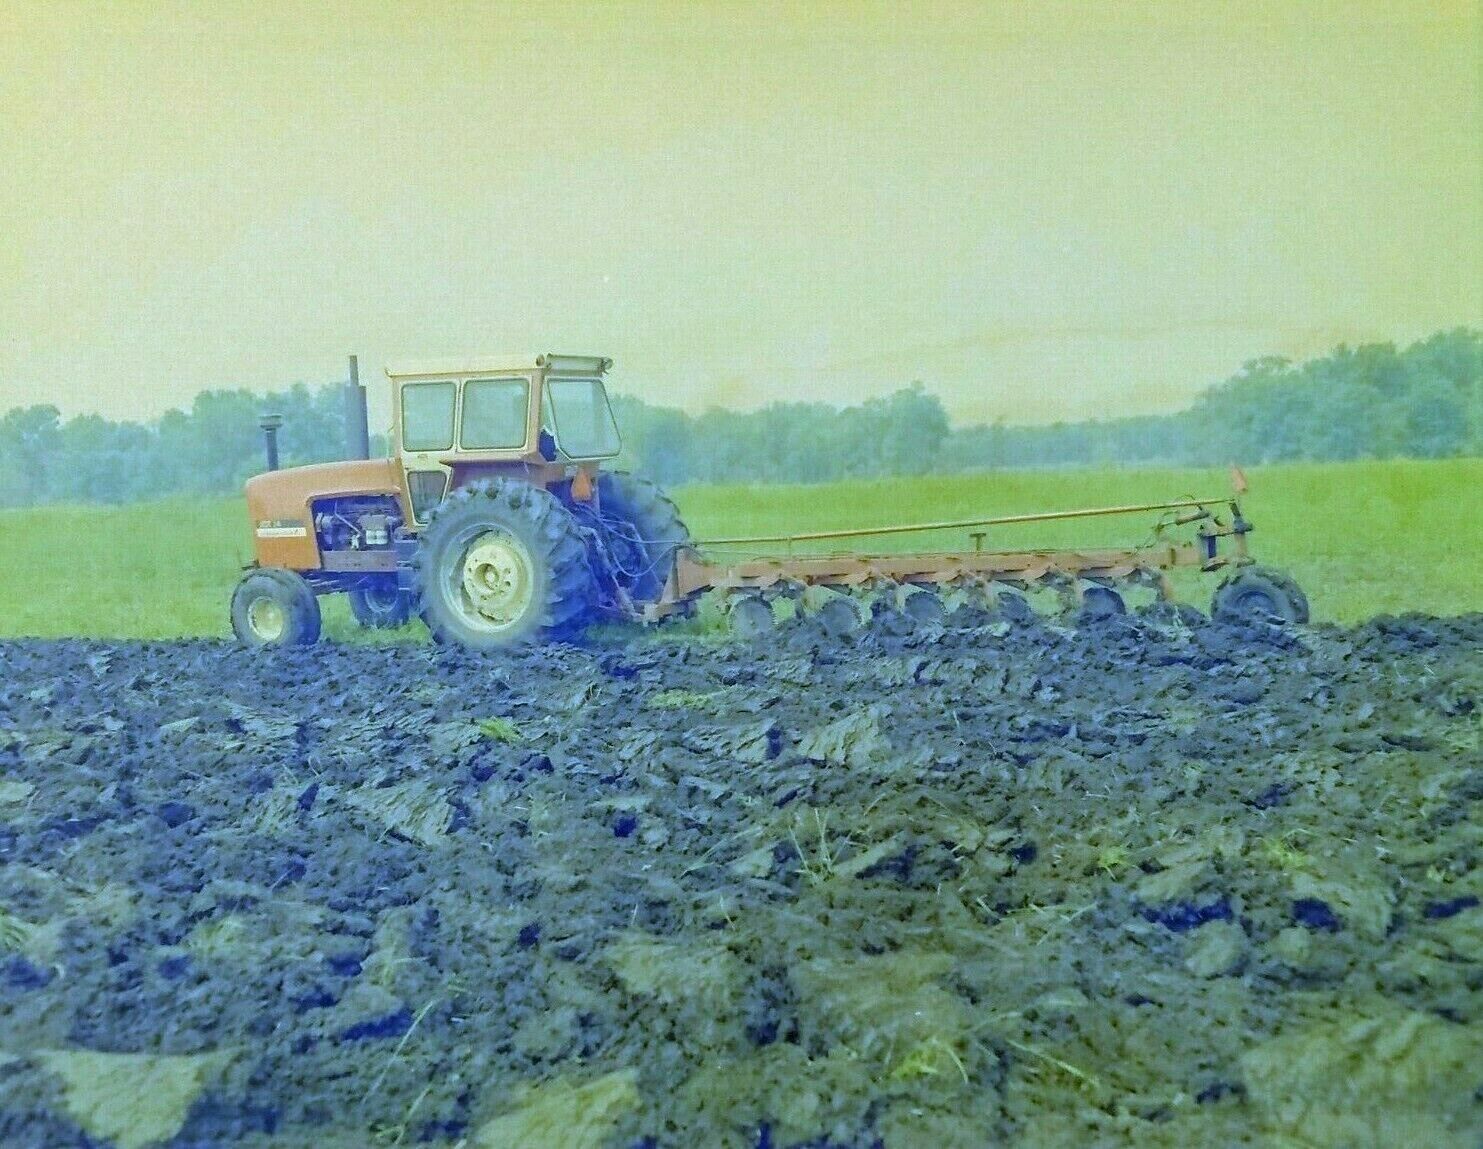 AC0038 Allis Chalmers FARMING MEDIA ARCHIVES 4x5 NEGATIVE PRODUCT TRACTOR